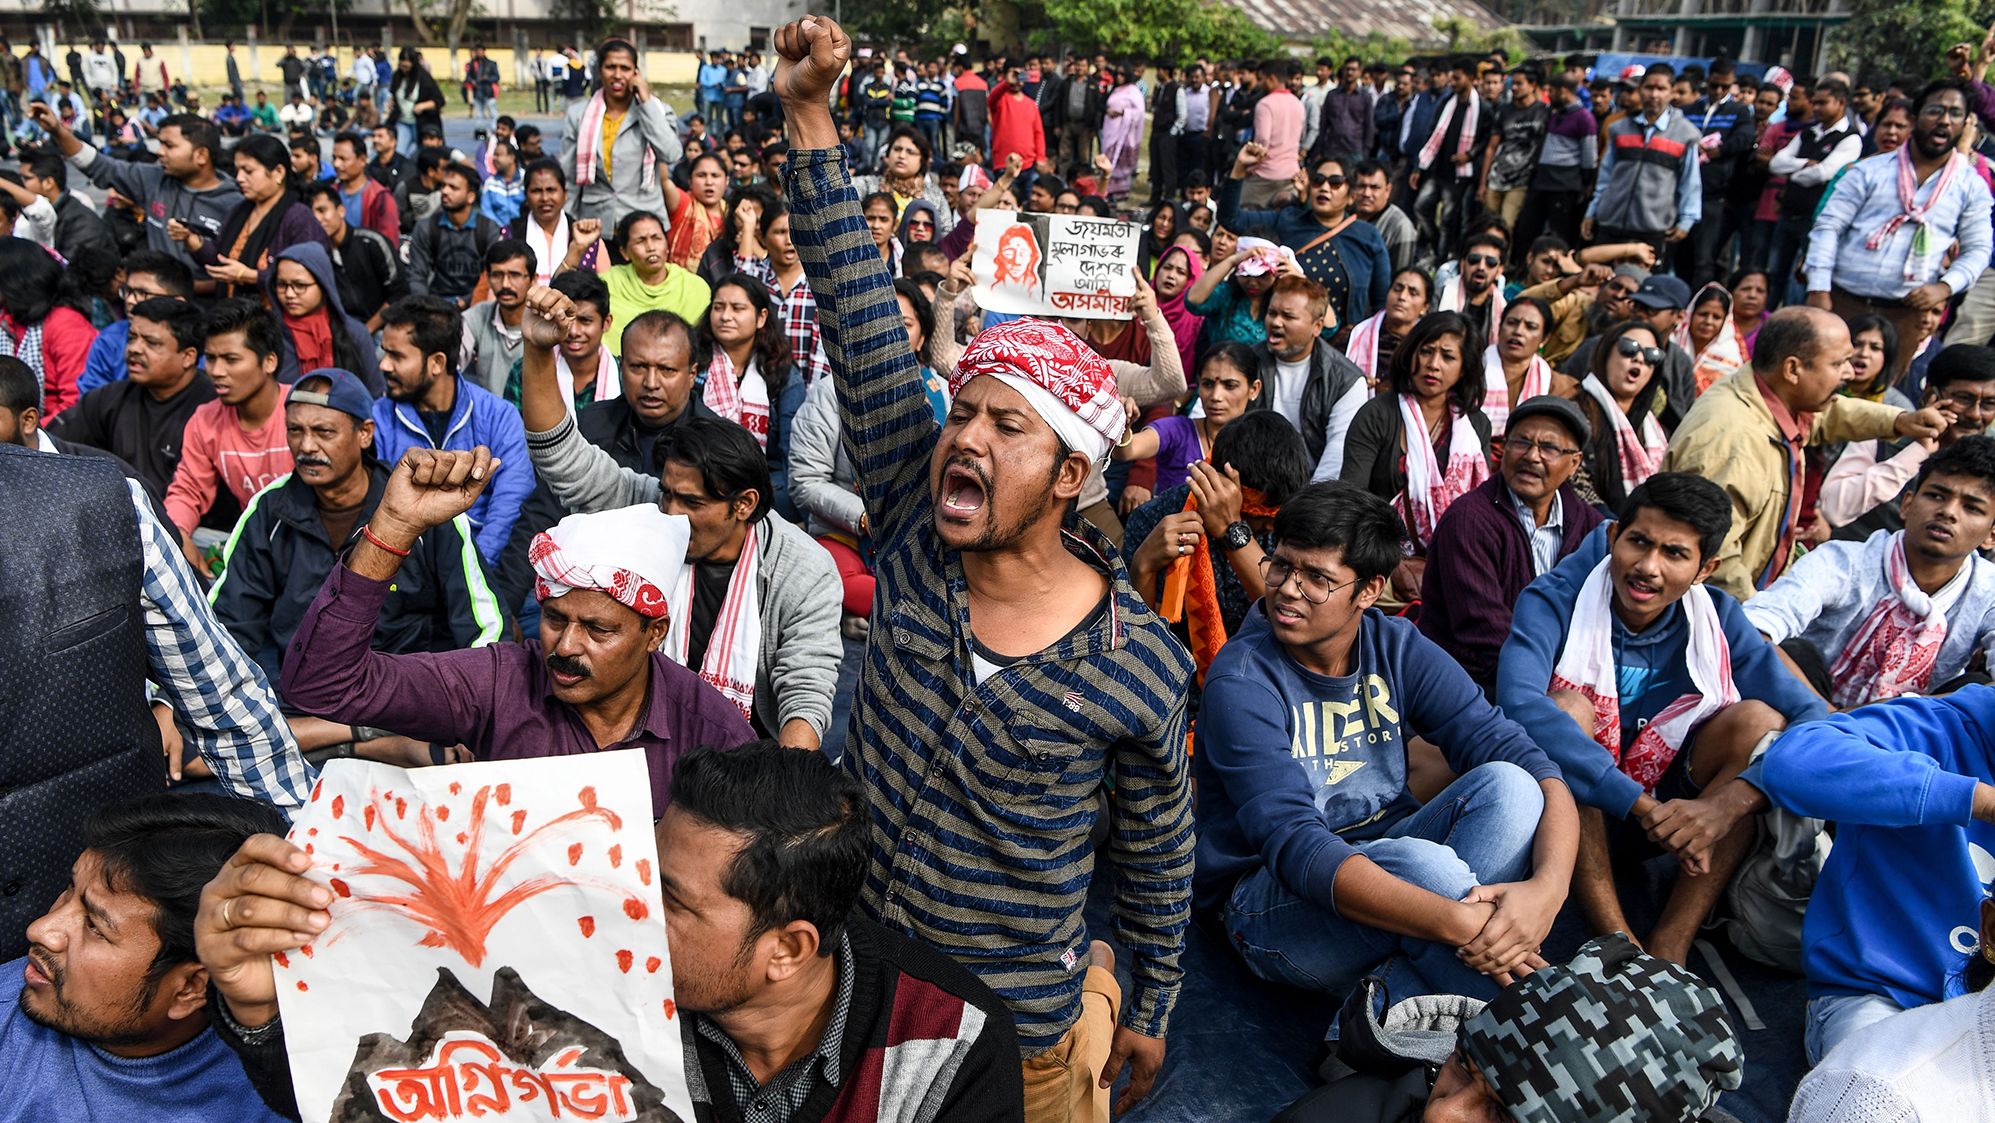 Demonstrators shout slogans during a protest in Guwahati on Friday, December 13.